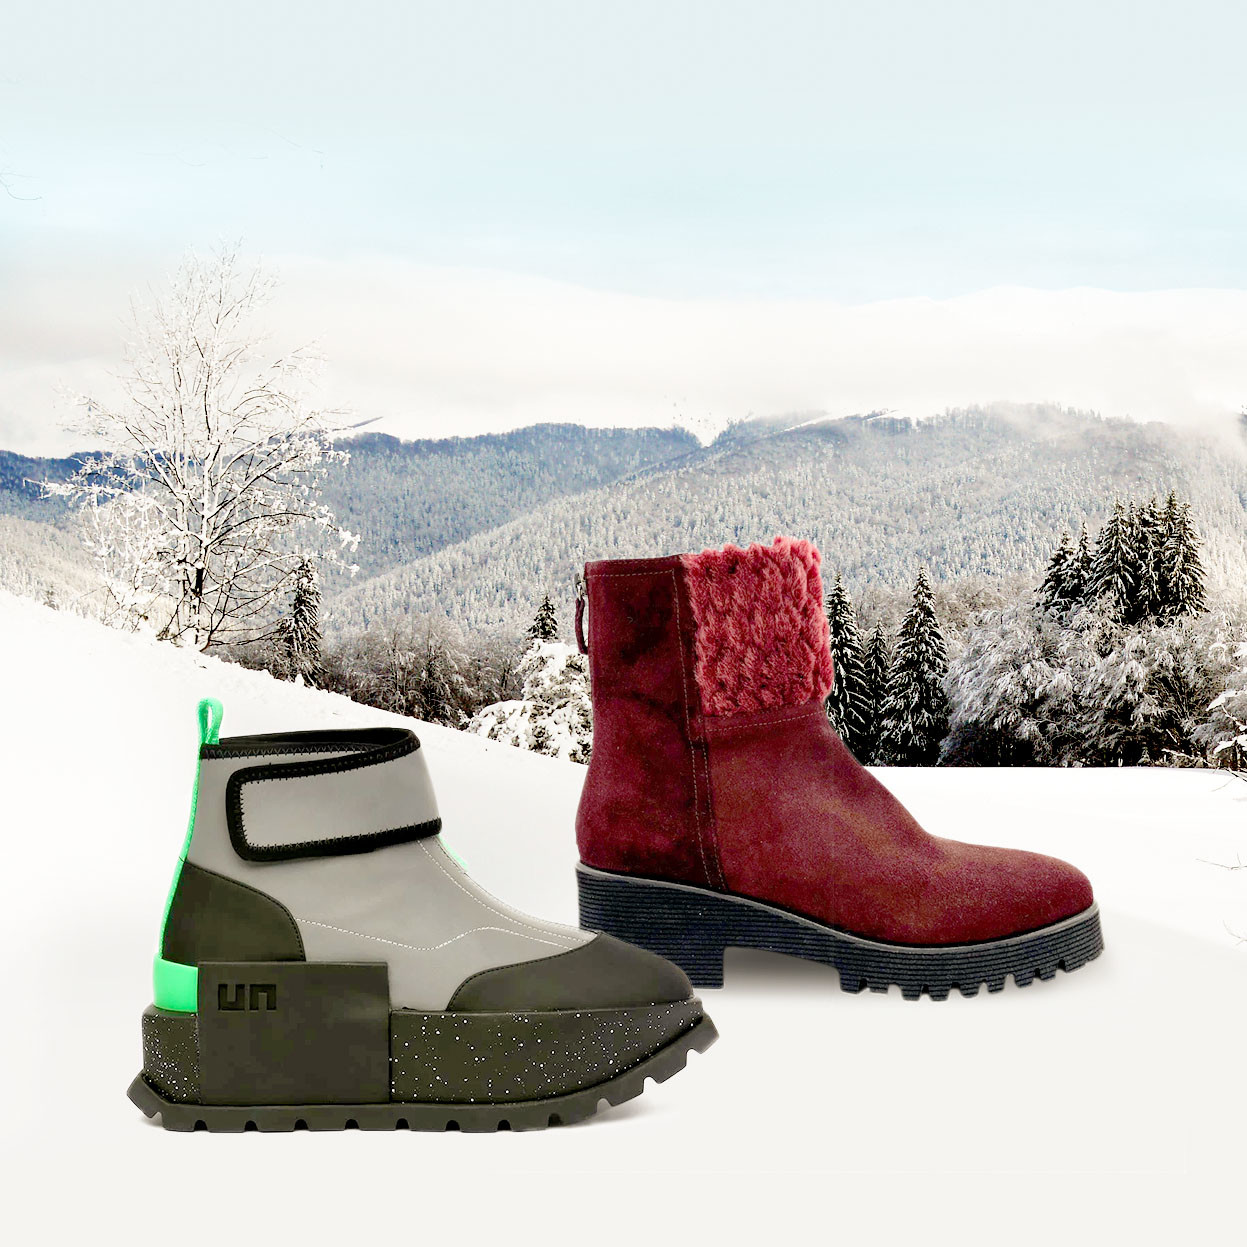 Comfy boots for your winter outdoor adventure